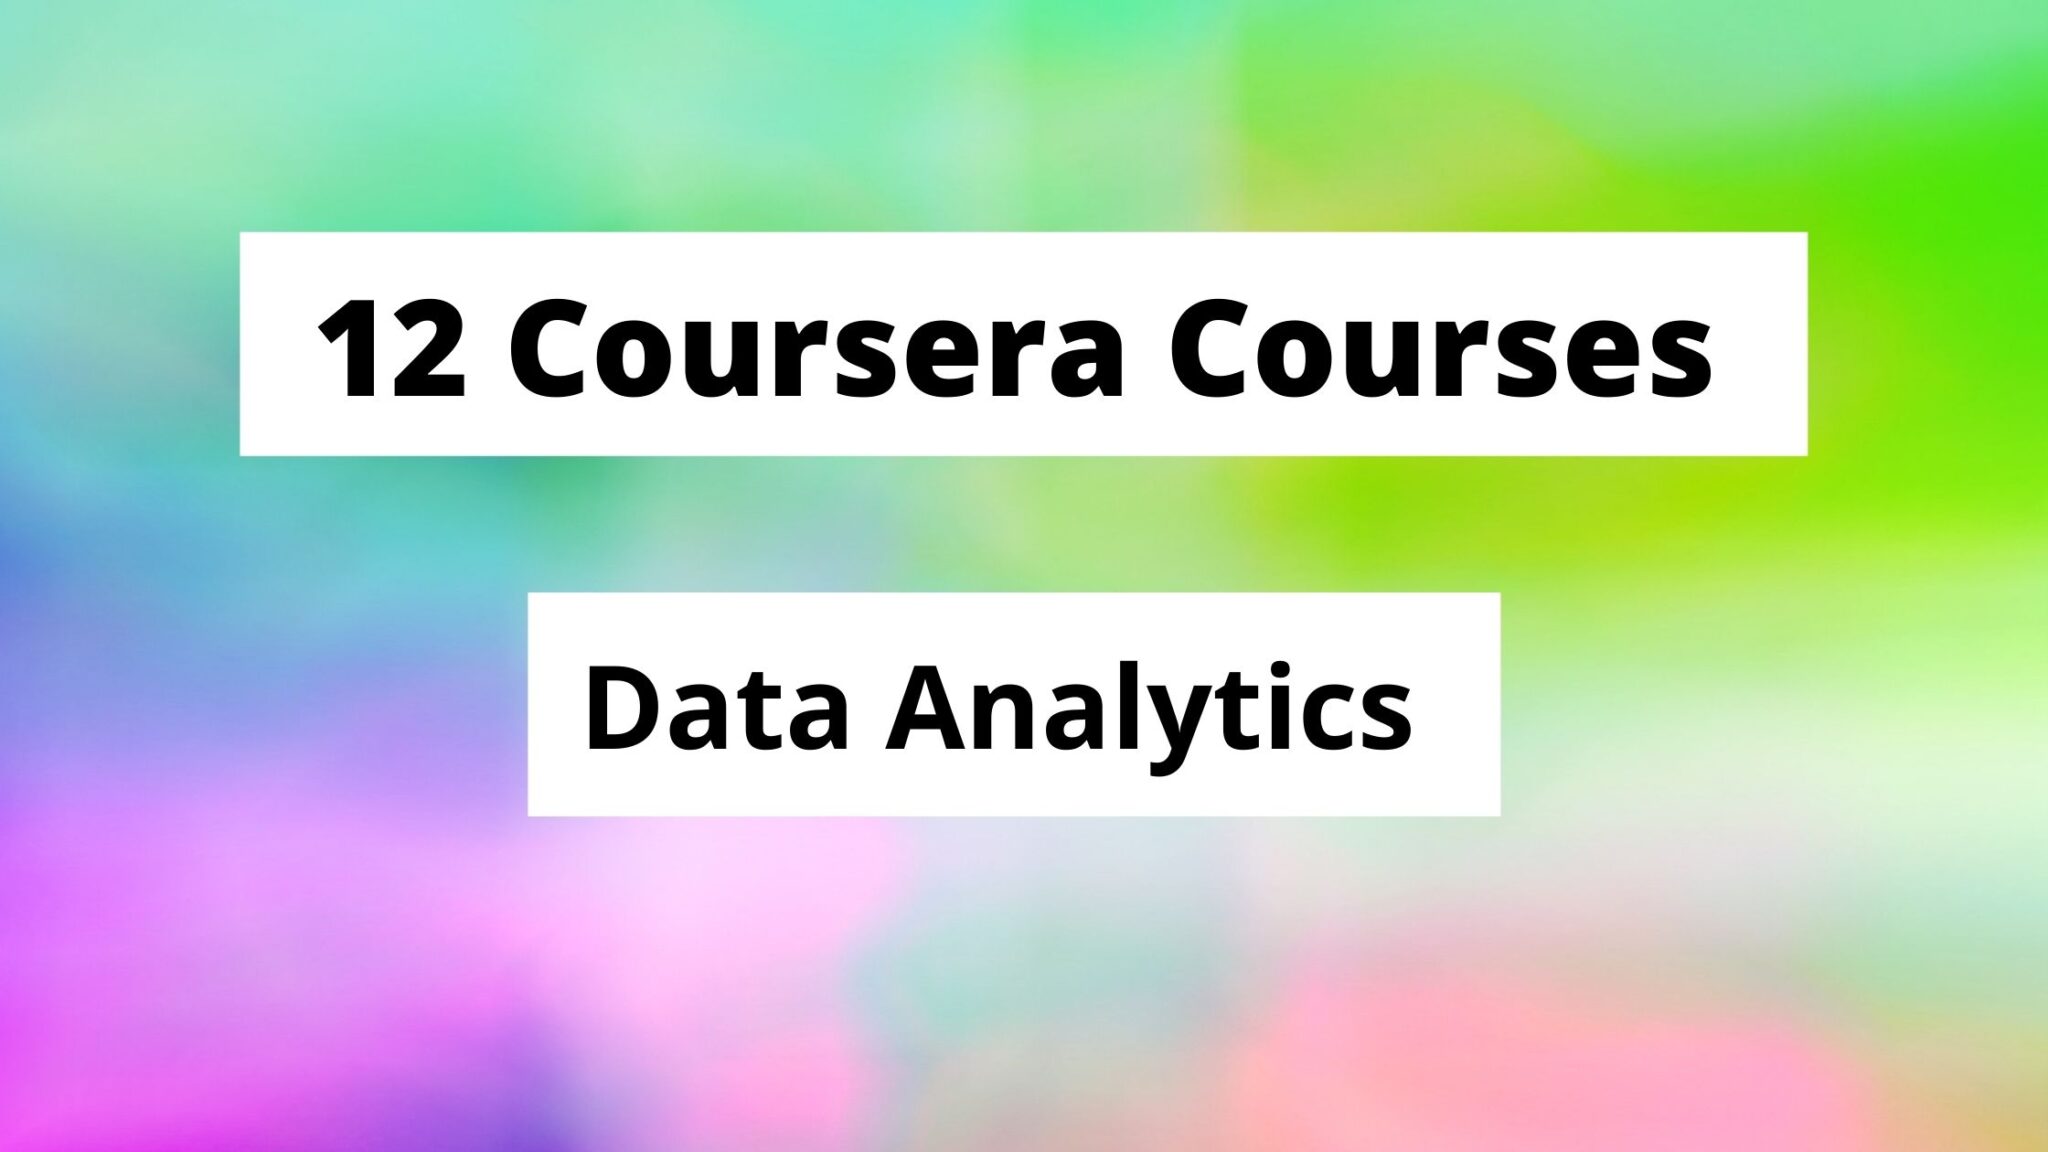 coursera learn sql basics for data science